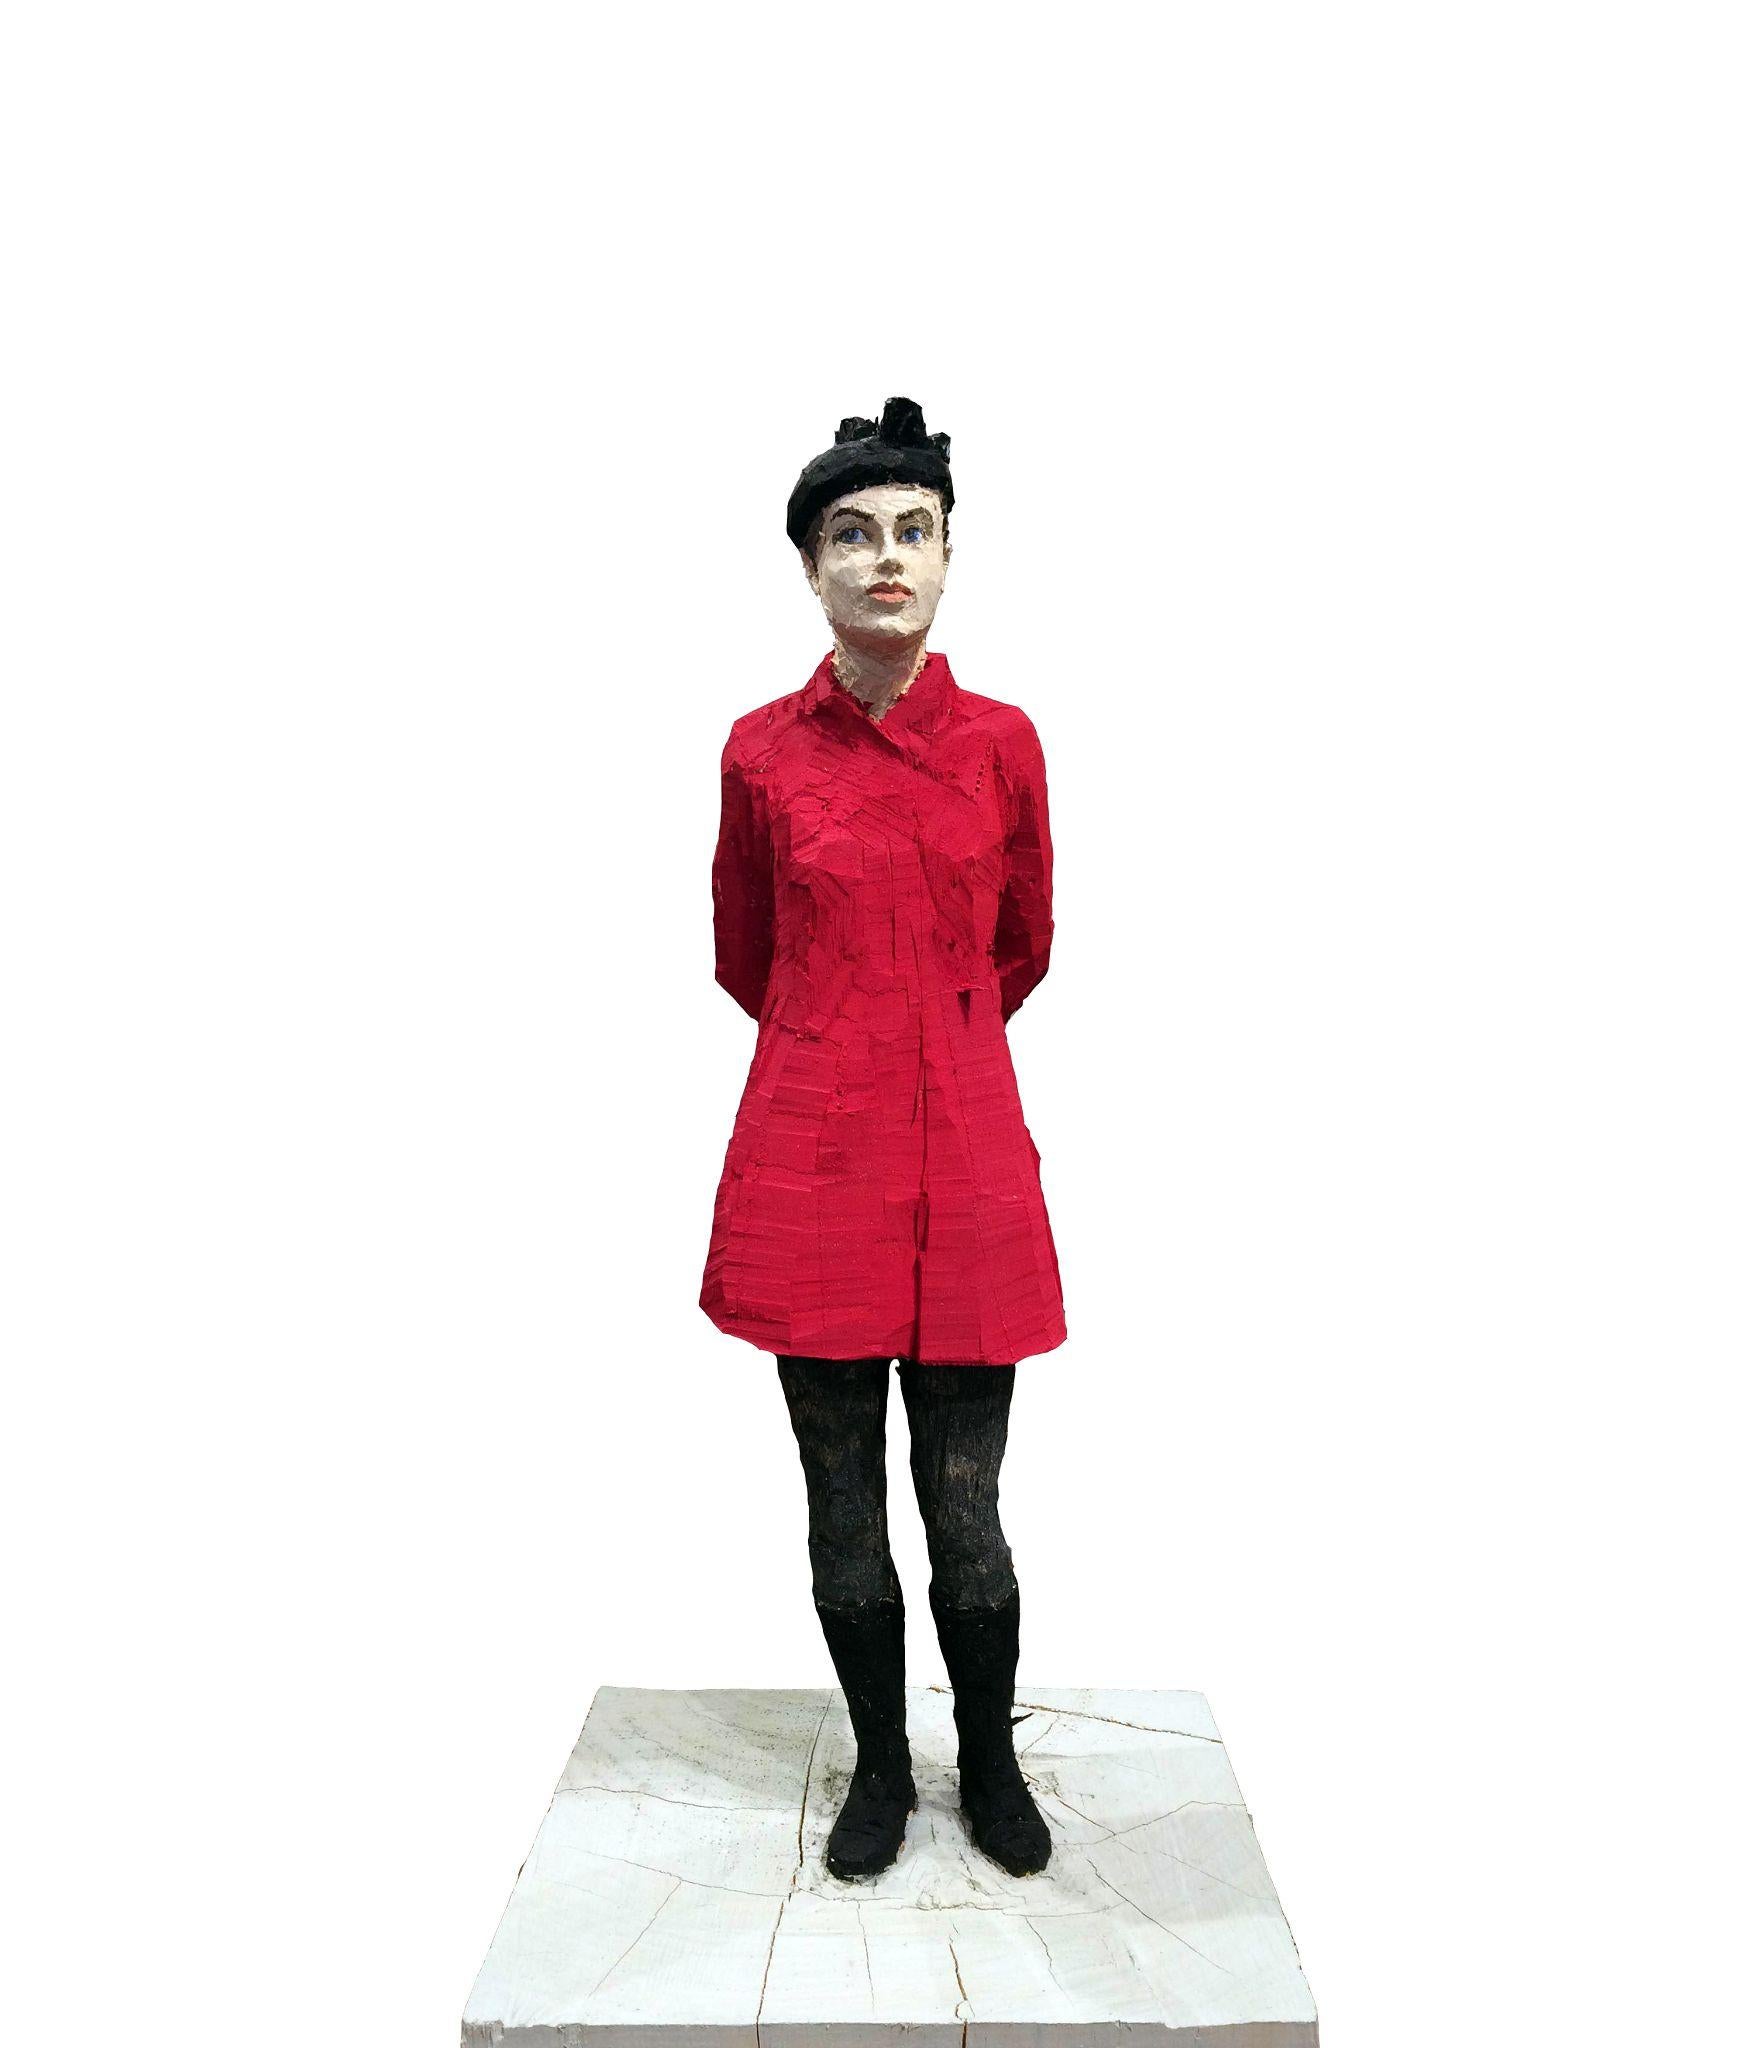 Stephan Balkenhol Figurative Sculpture - Woman with Red Jacket